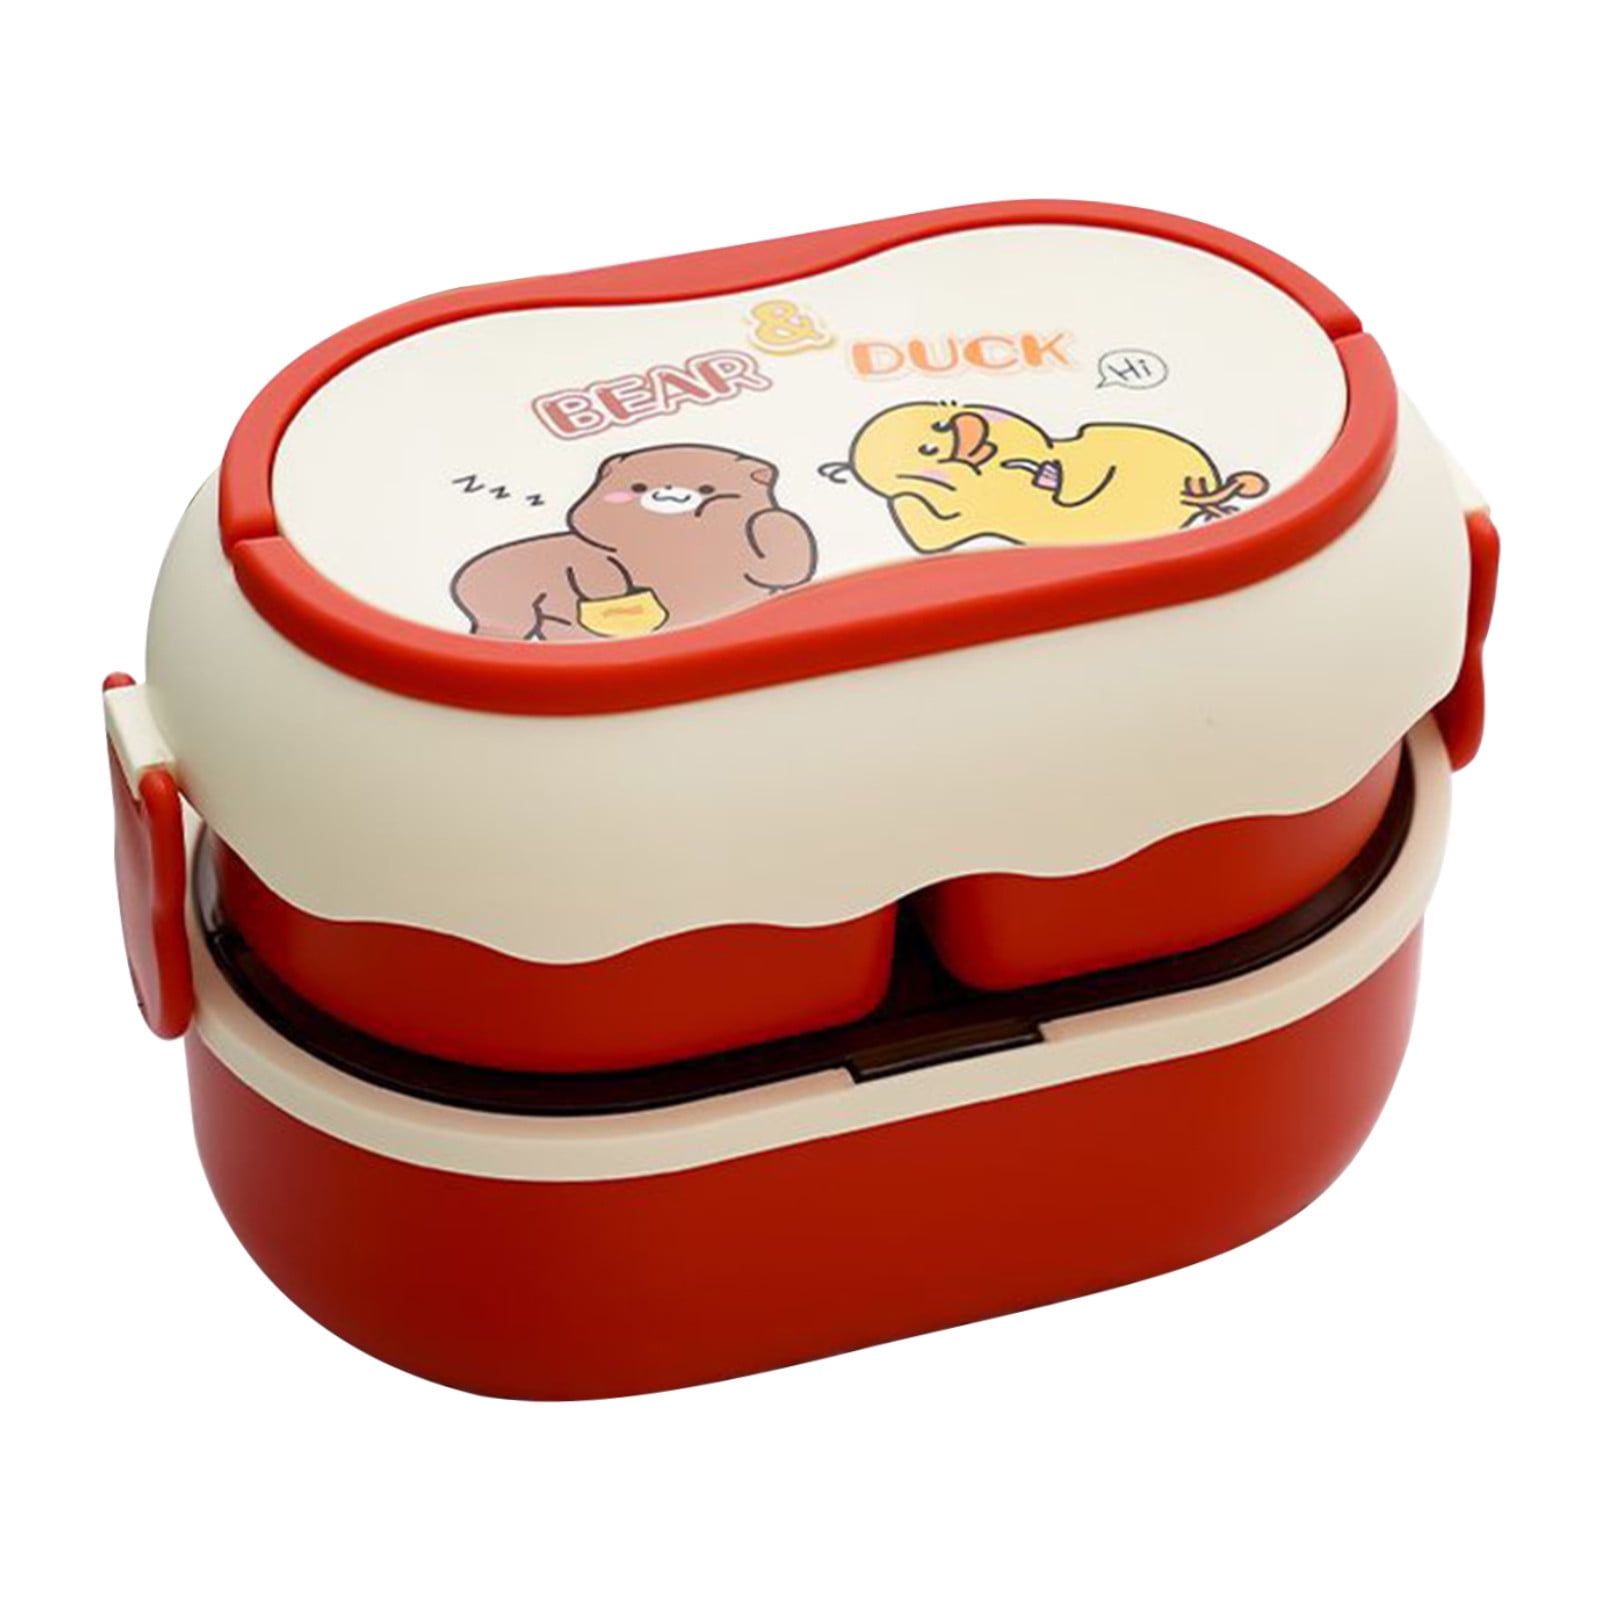 Xmmswdla Preppy Lunch Box Red Lunch Boxchildren'S Lunch Box Water Cup Set Sealed Leak-Proof Compartment Lunch Box Lunch Toddler Bento Box, Toddler